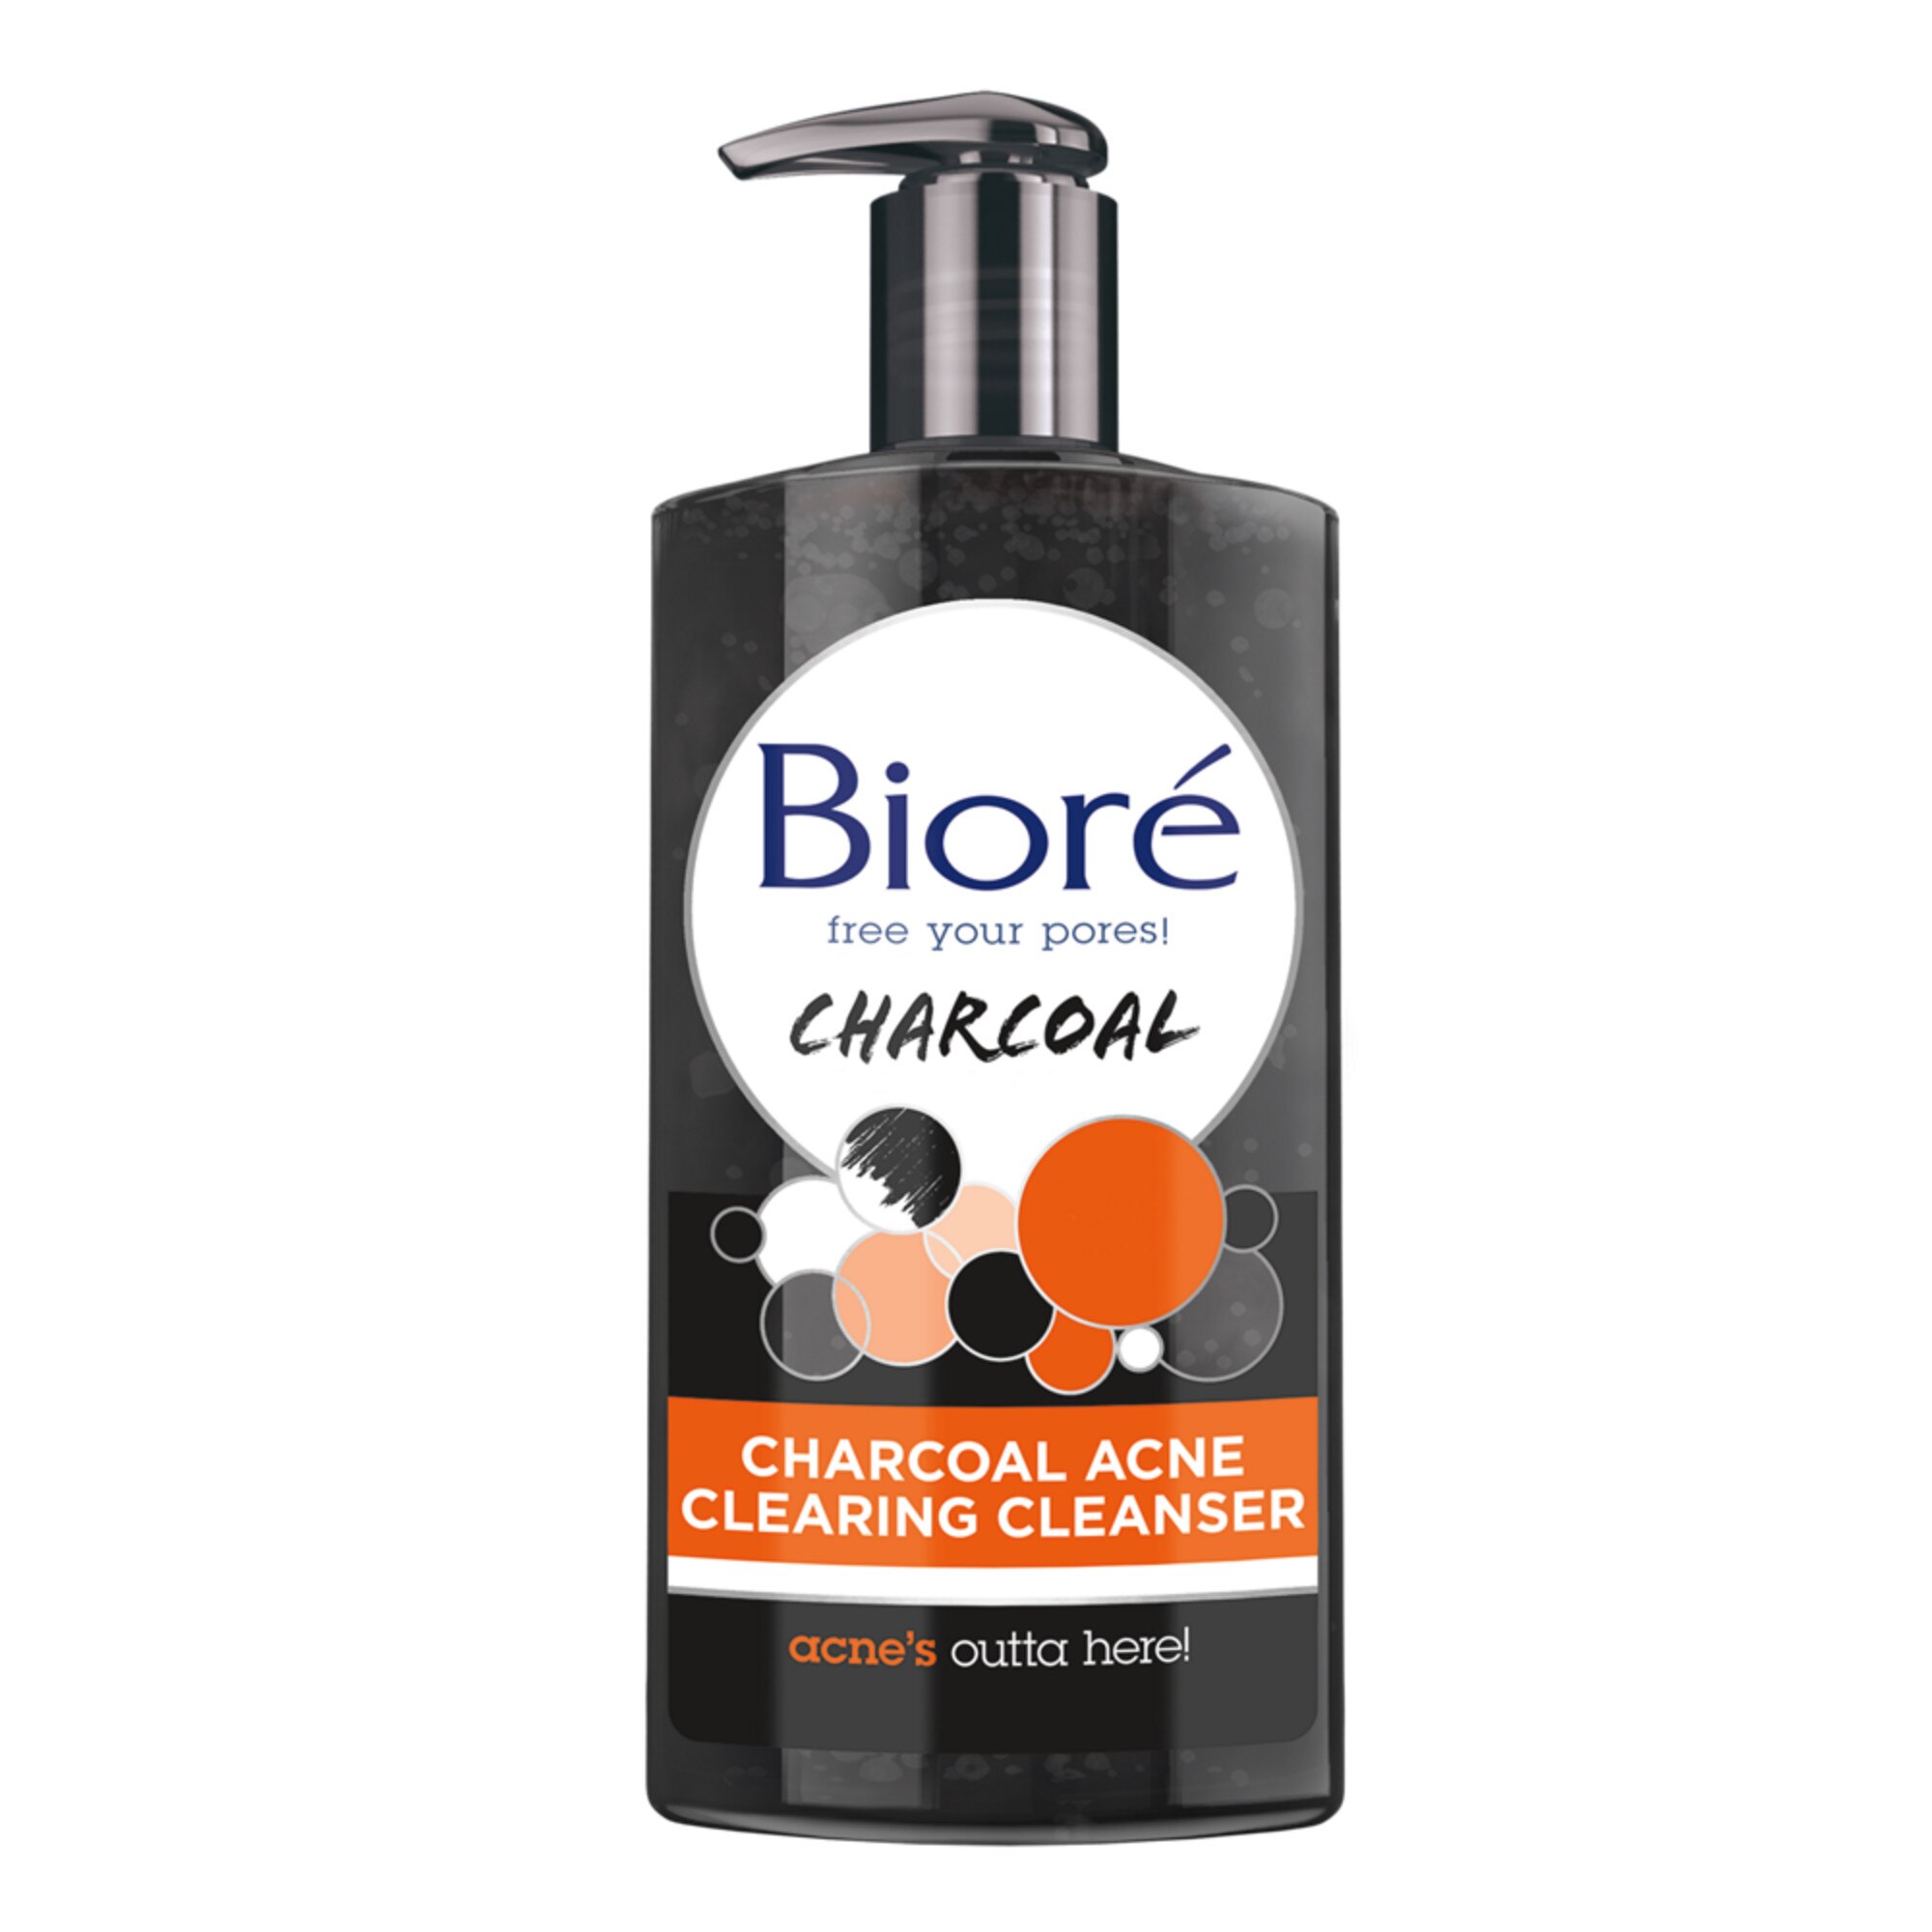 Biore Charcoal Acne Face Wash, 1% Salicylic Acid, for Normal to Oily Skin, 6.77 OZ